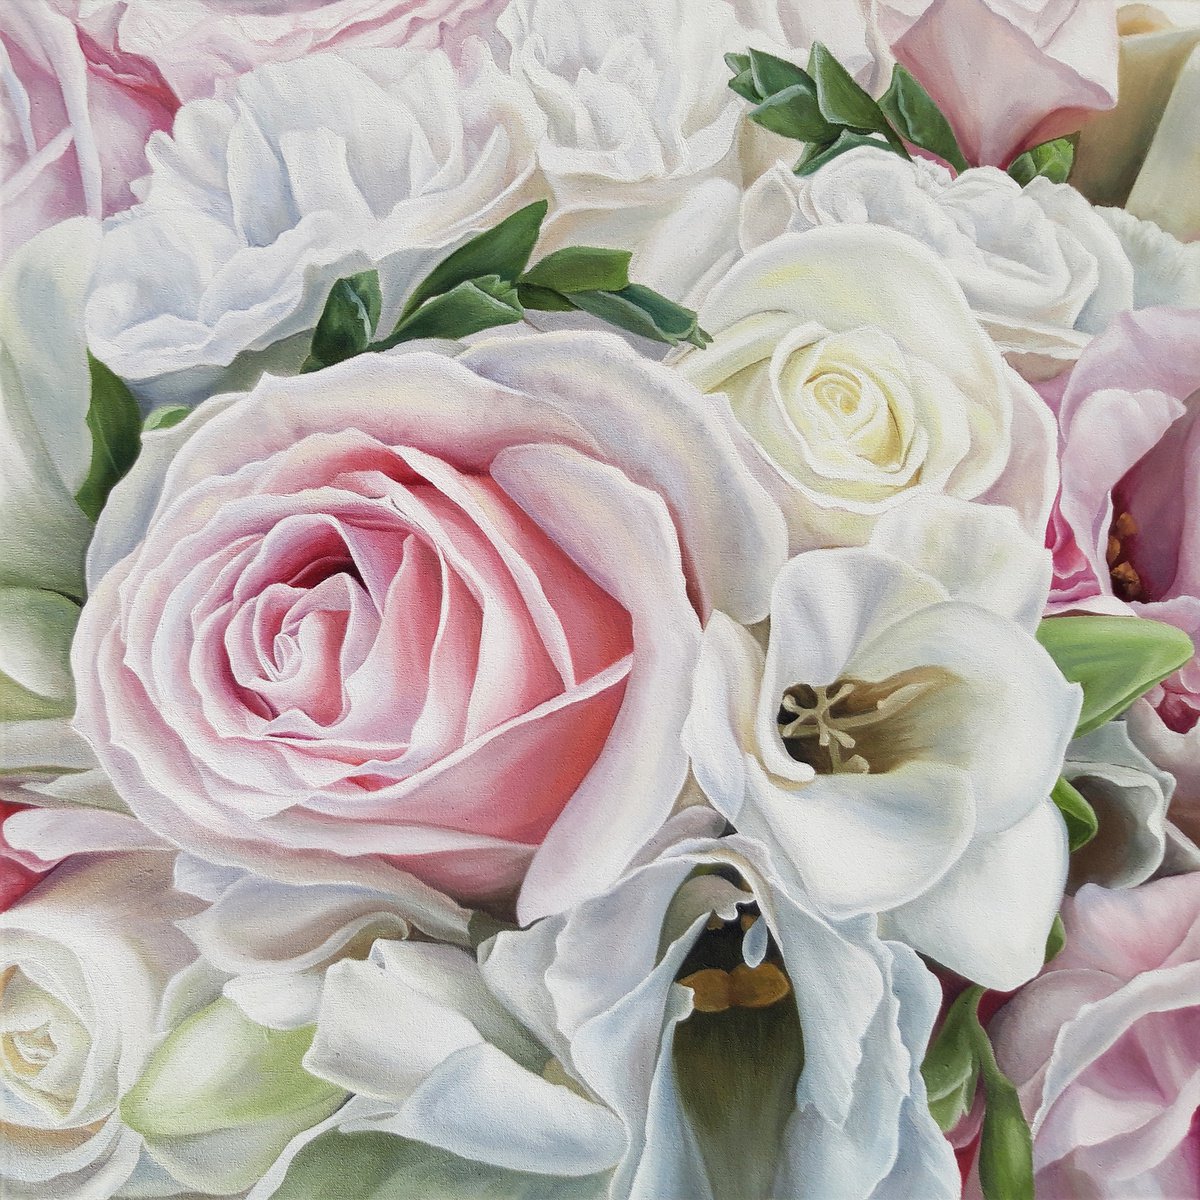 Tender dreams, roses painting by Anna Steshenko